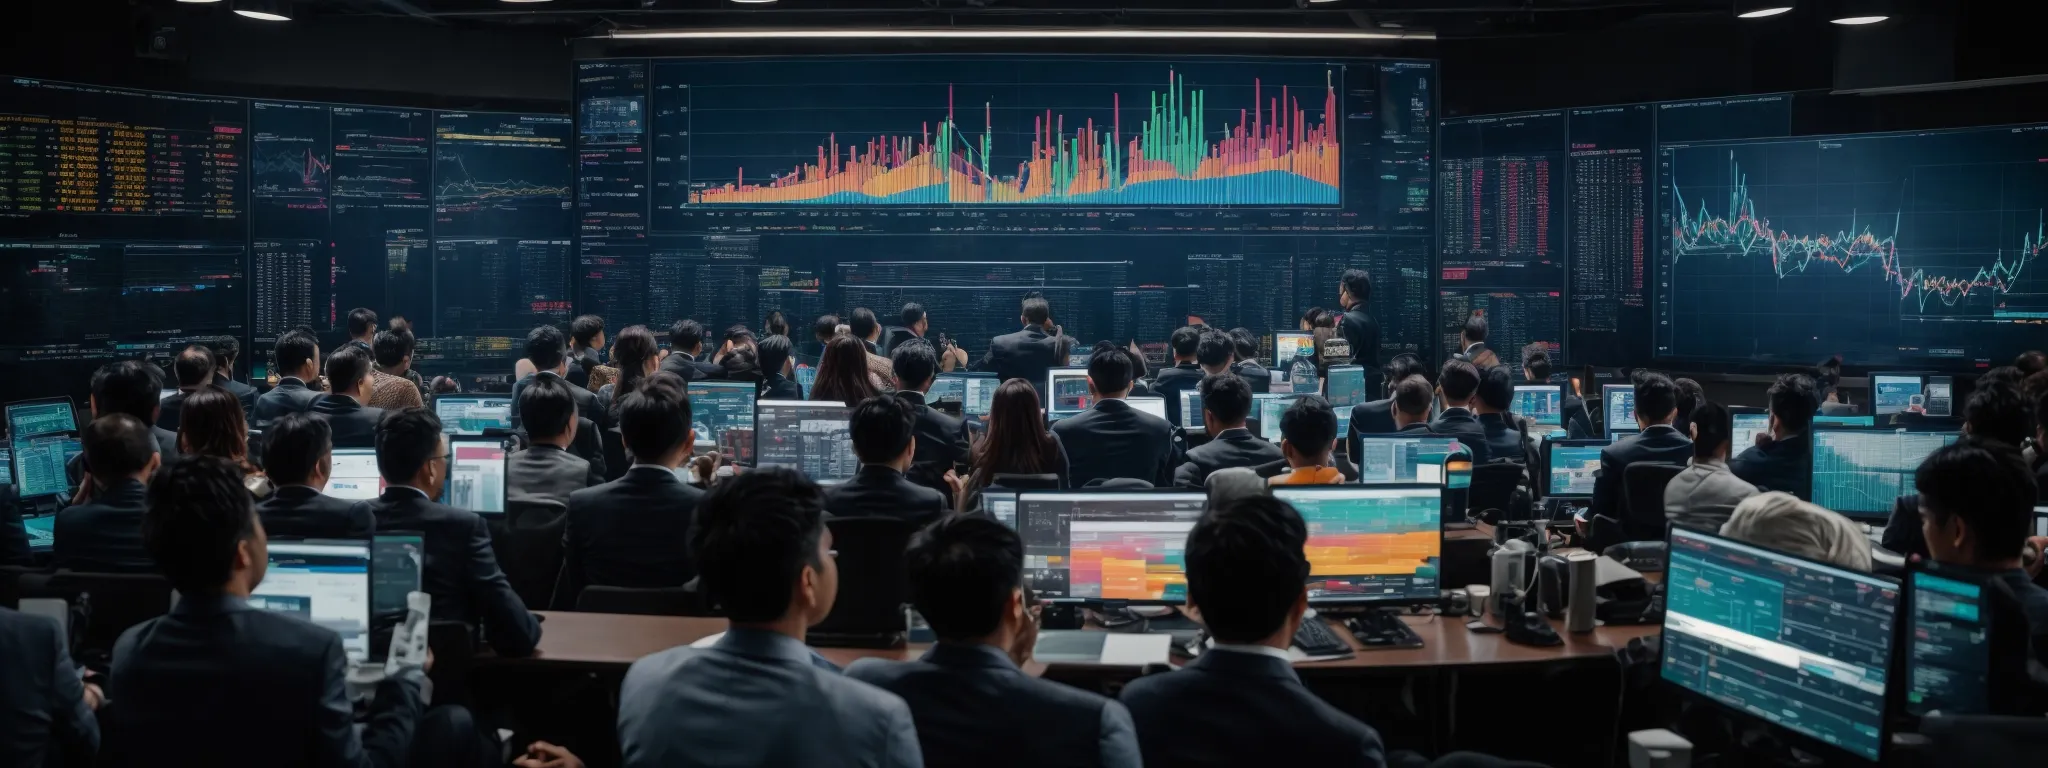 a group of professionals gathered around a large screen displaying colorful analytics graphs and traffic statistics.